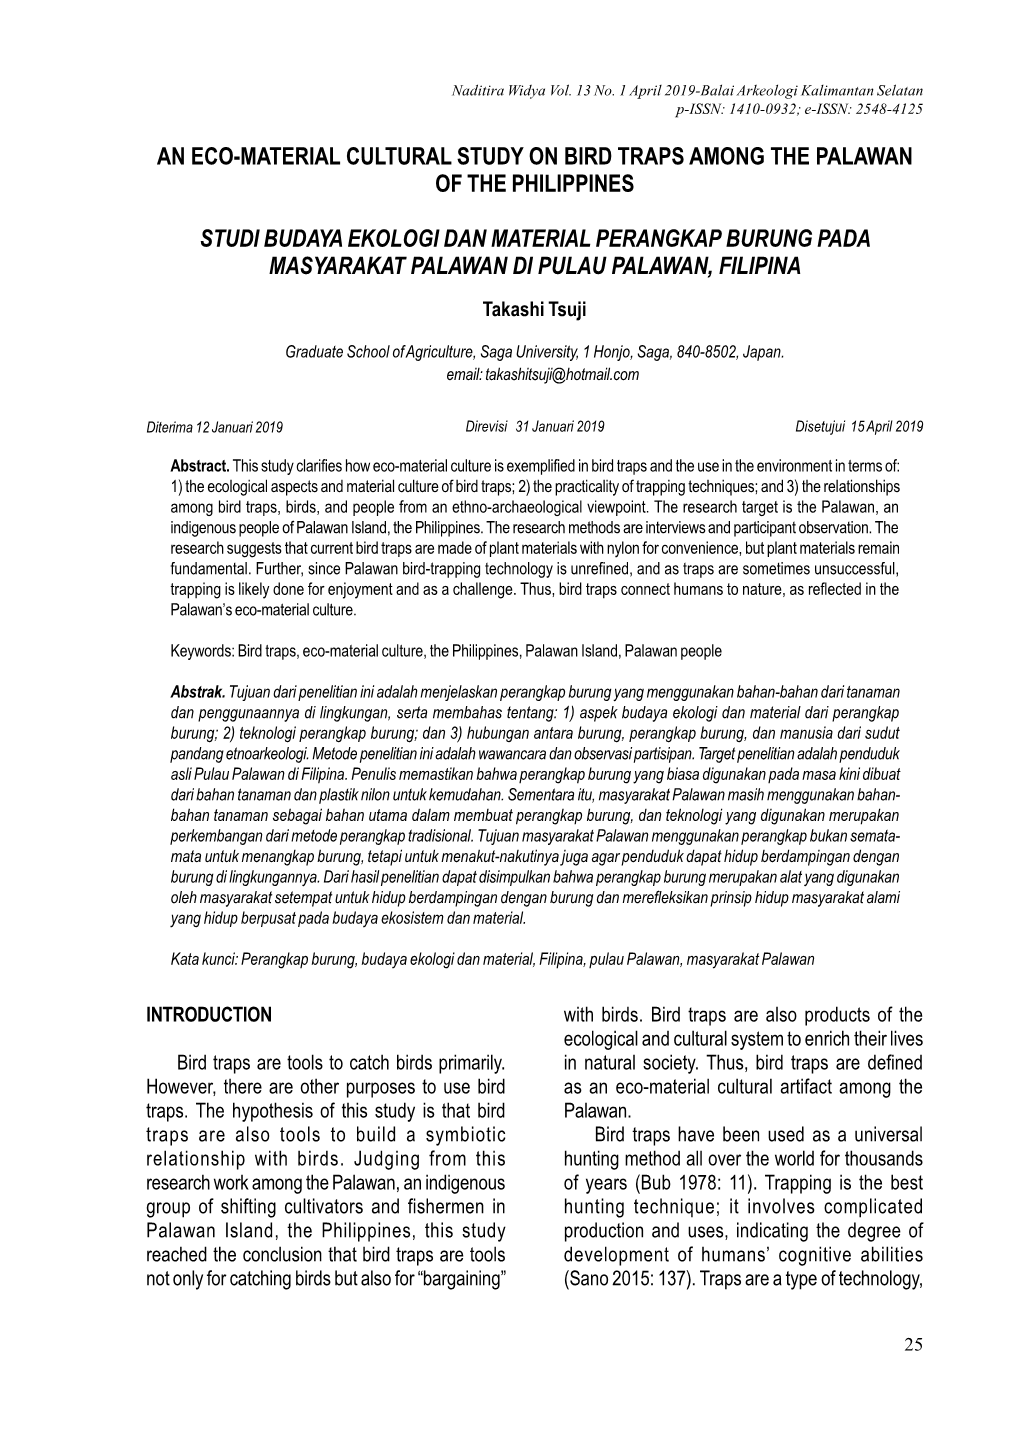 An Eco-Material Cultural Study on Bird Traps Among the Palawan of the Philippines